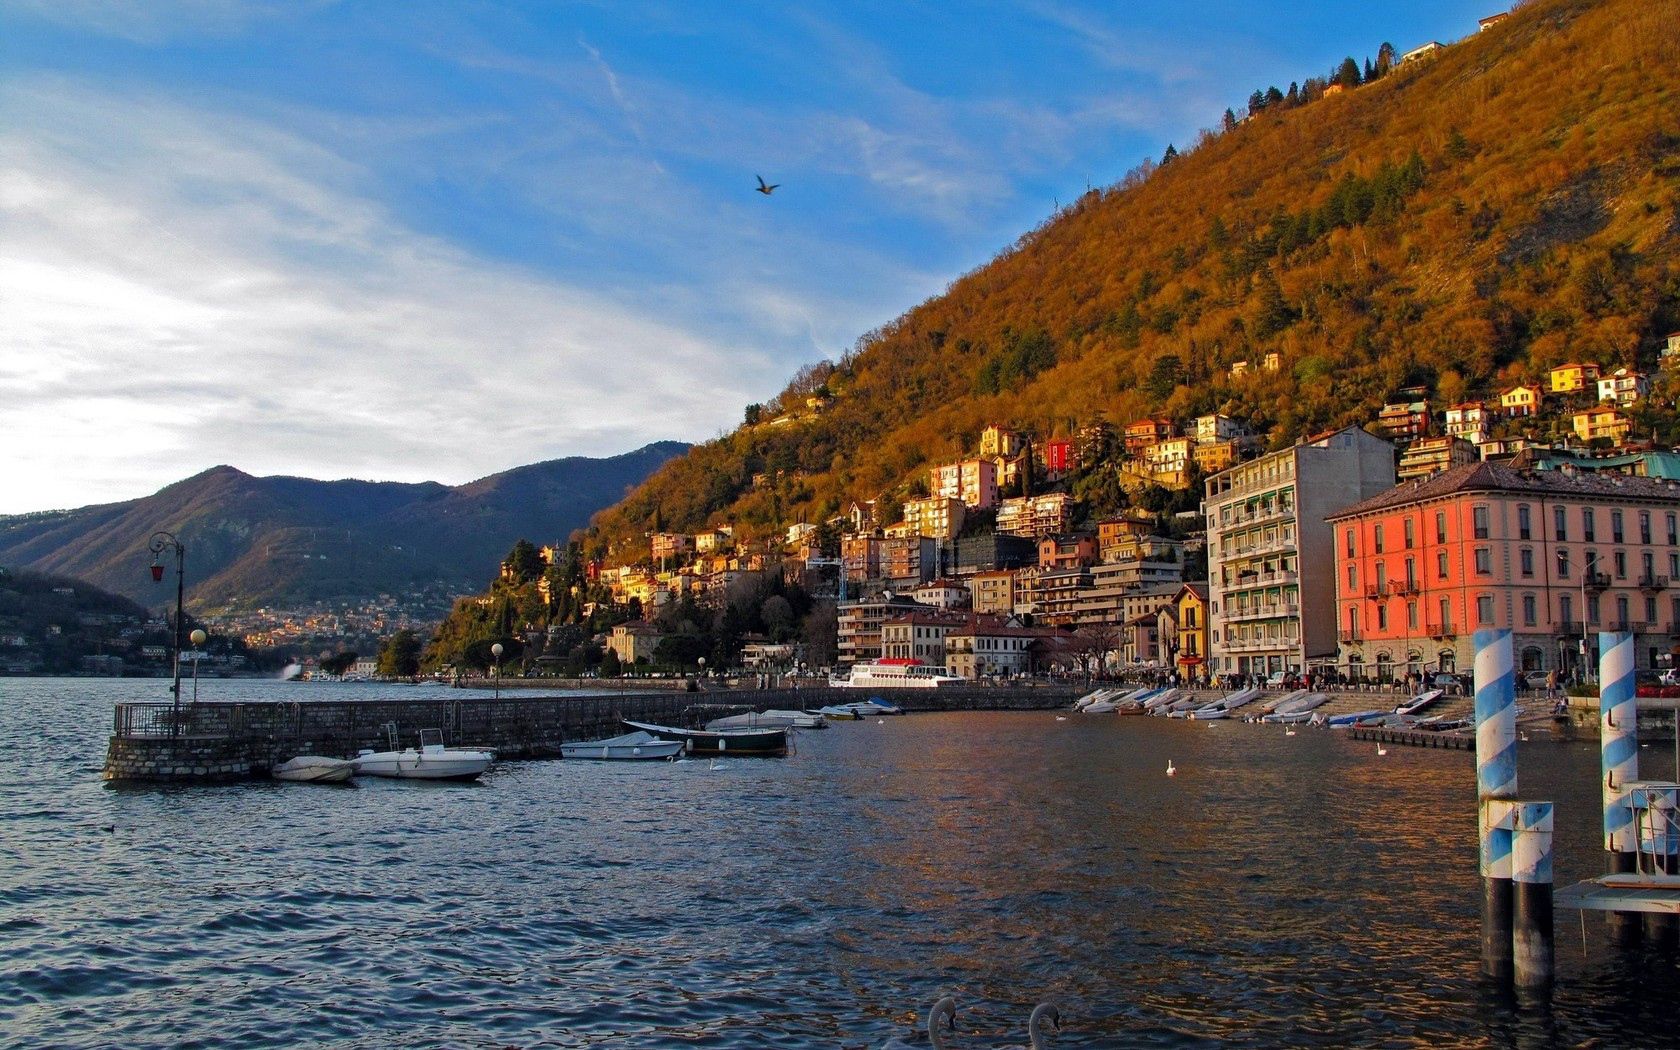 Download PC Wallpaper cities, water, houses, sky, mountains, sea, italy, wharf, berth, embankment, quay, lombardy, como